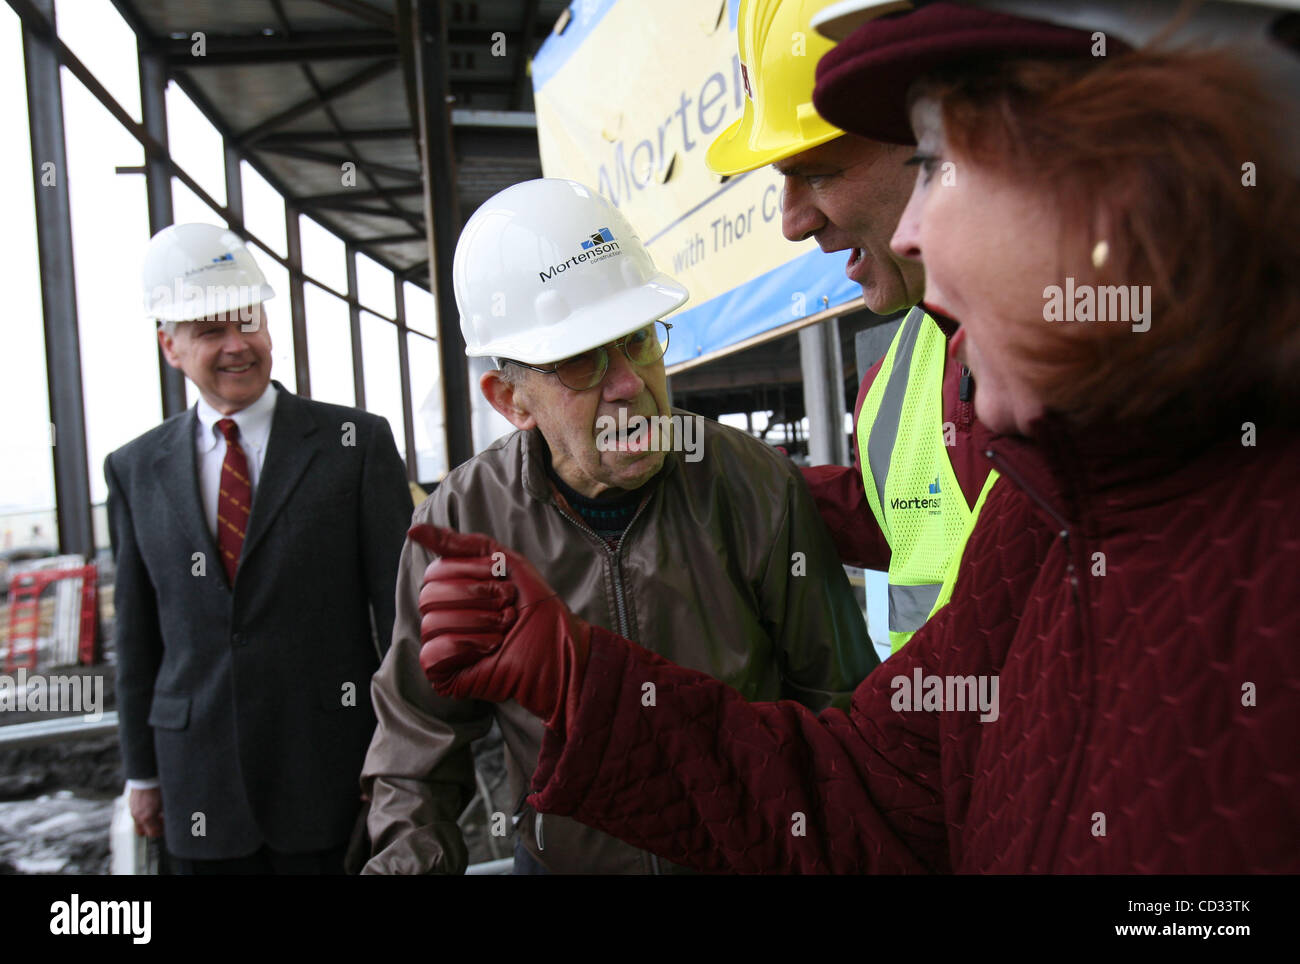 KYNDELL HARKNESS â€¢ kharkness@startribune.com Hilding Mortenson, 100, sang the University of Minnesota's fight song along with athletic director Joel Maturi, and Margaret Carlson, of the Alumni Association after Mortenson laid the first brick to the new football stadium. Mortenson was a sophomore i Stock Photo